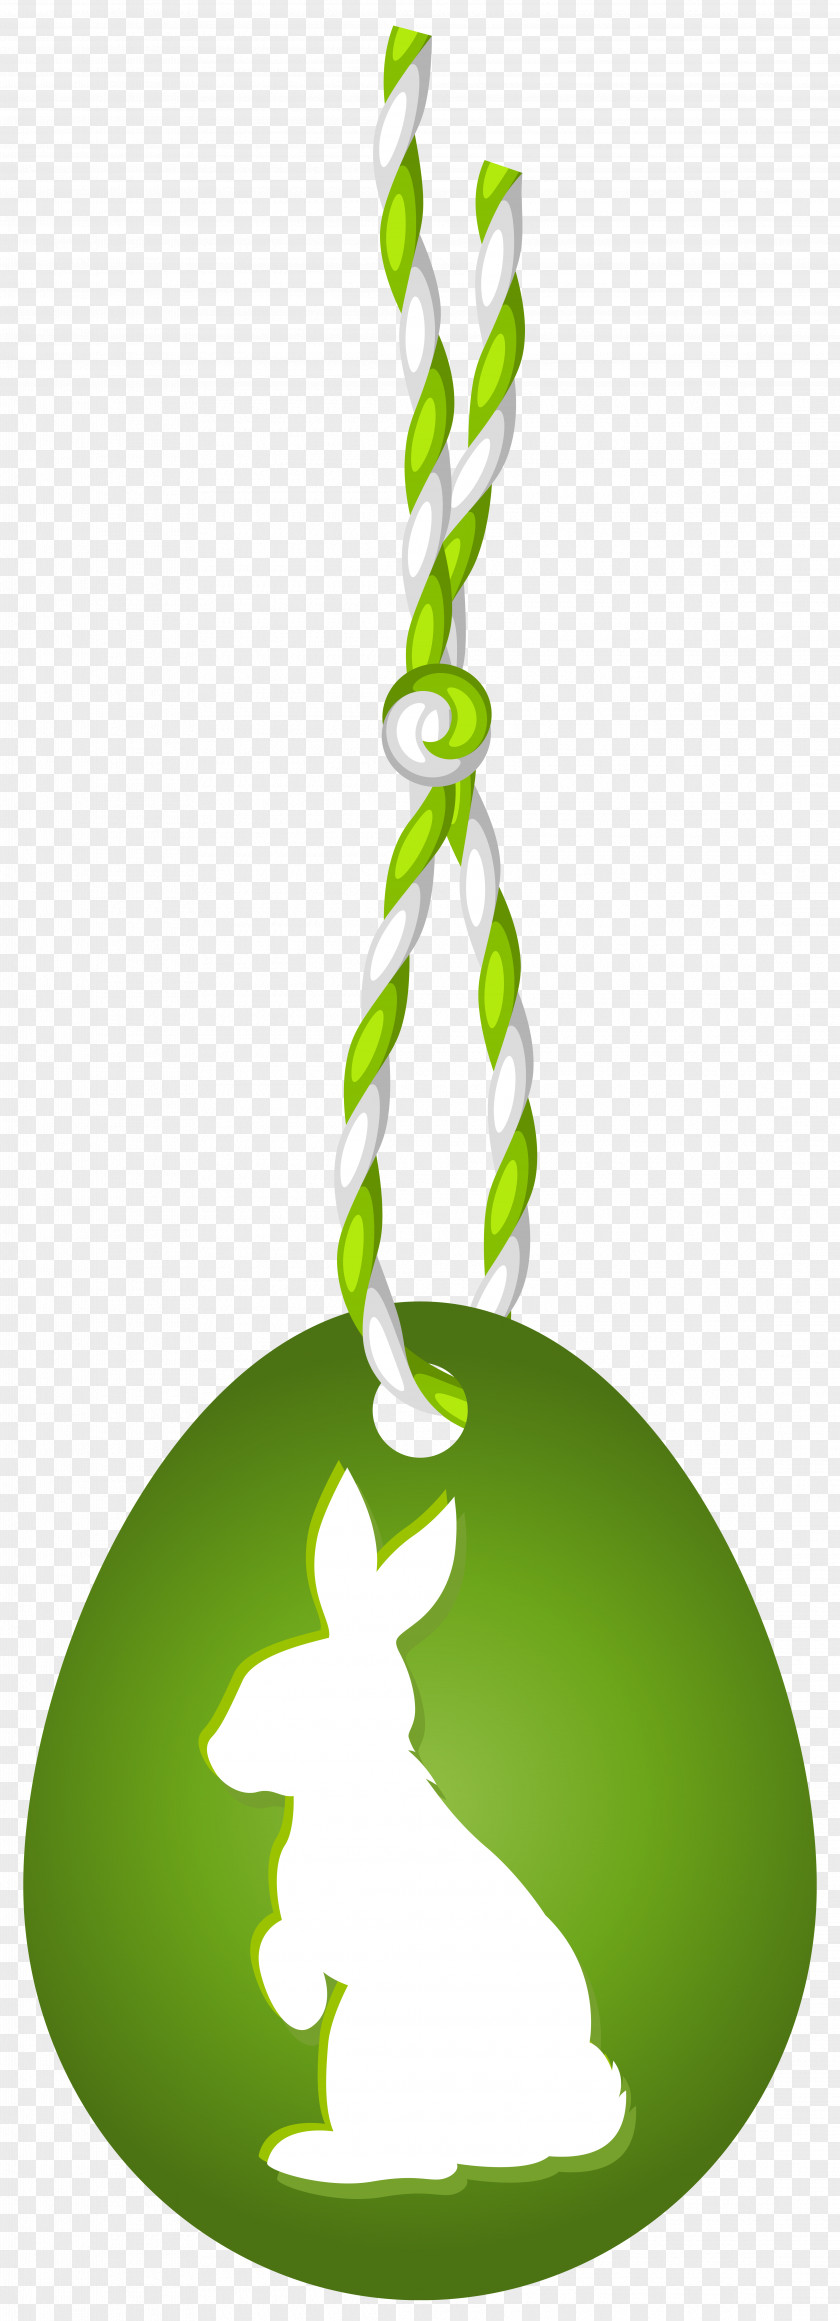 Green Easter Hanging Egg With Bunny Clip Art Image PNG